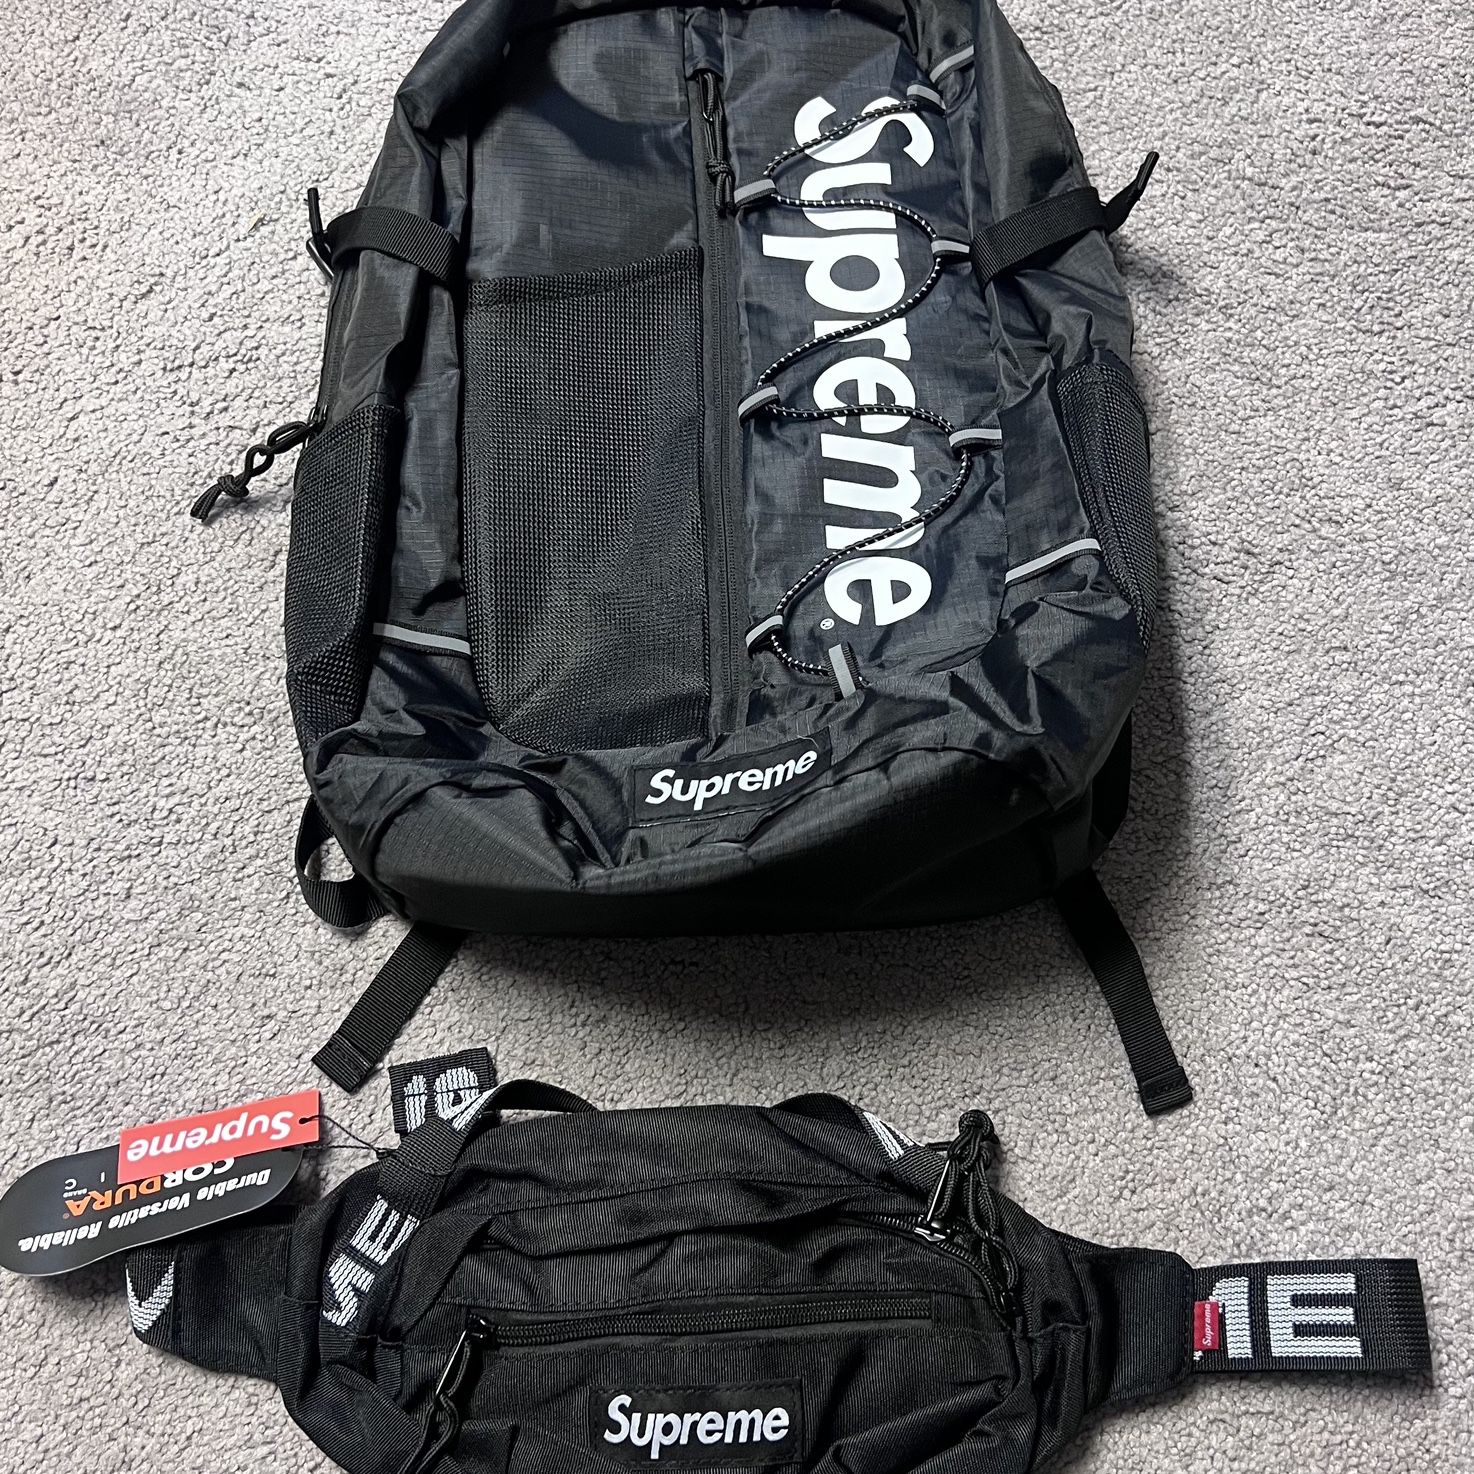 Supreme waist bag ss18 (red) for Sale in Bronx, NY - OfferUp